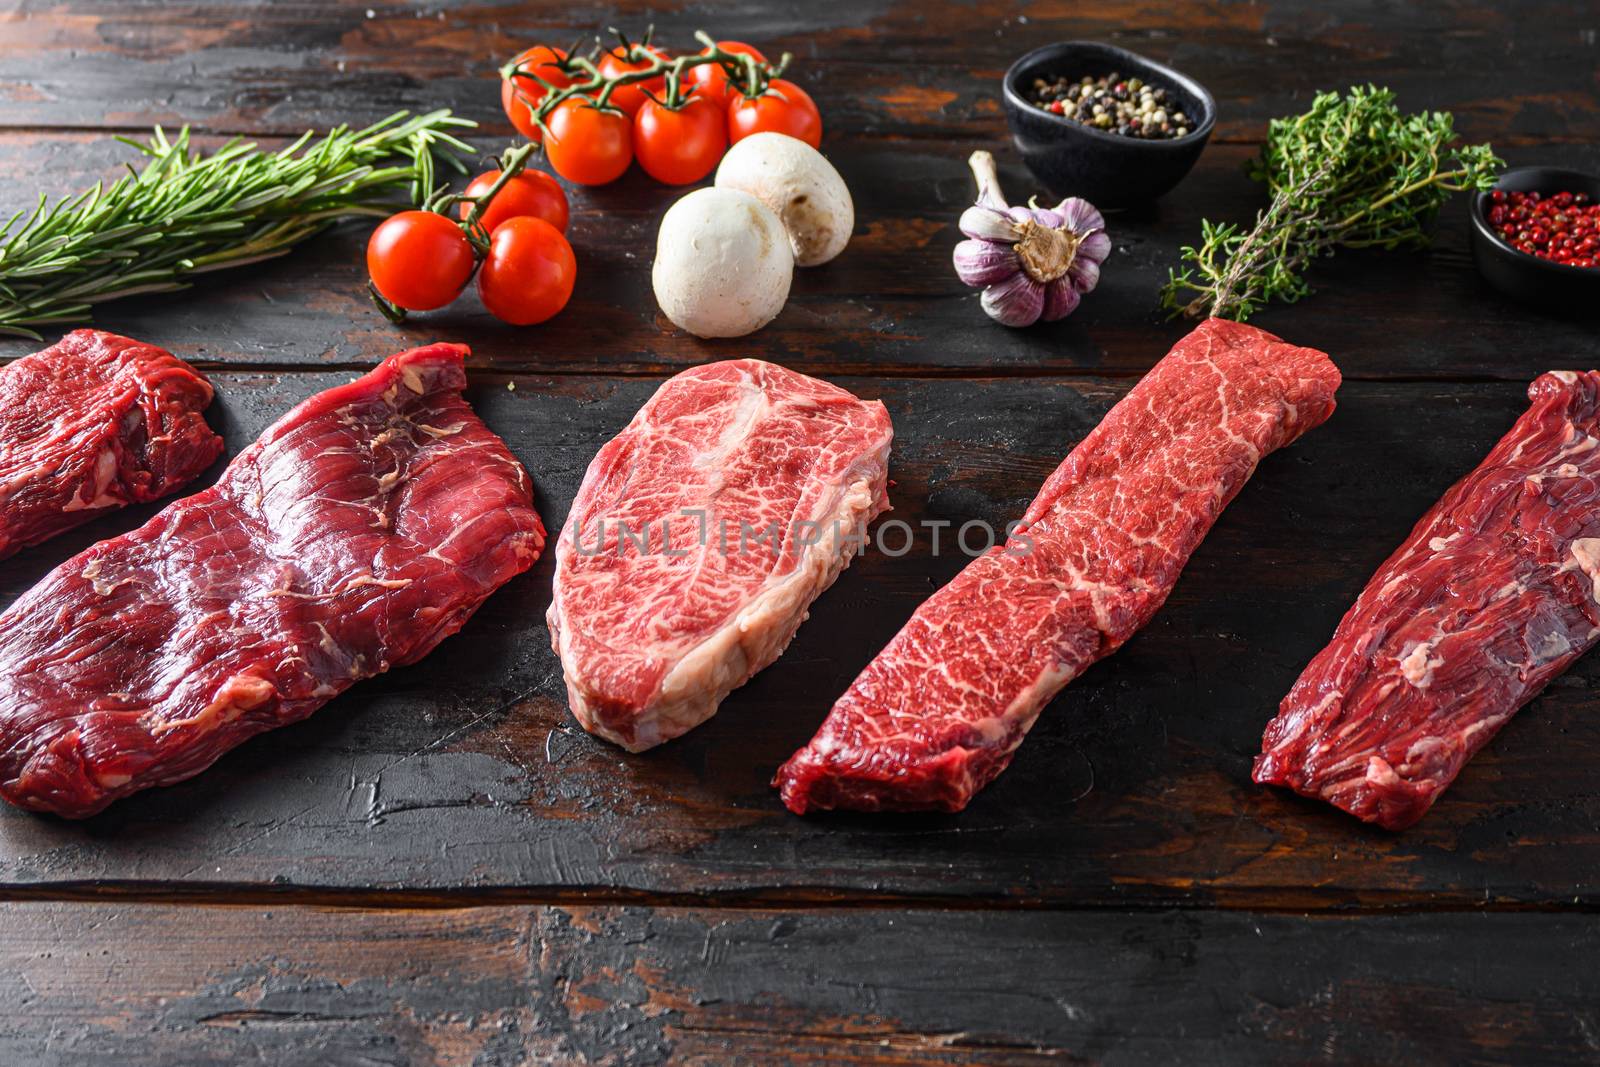 A set of different types of raw beef steaks alternative cut flap flank Steak, machete steak or skirt cut, Top blade or flat iron beef and tri tip, triangle roast with denver cut with fresh organic herbs over wood background side view space for text.